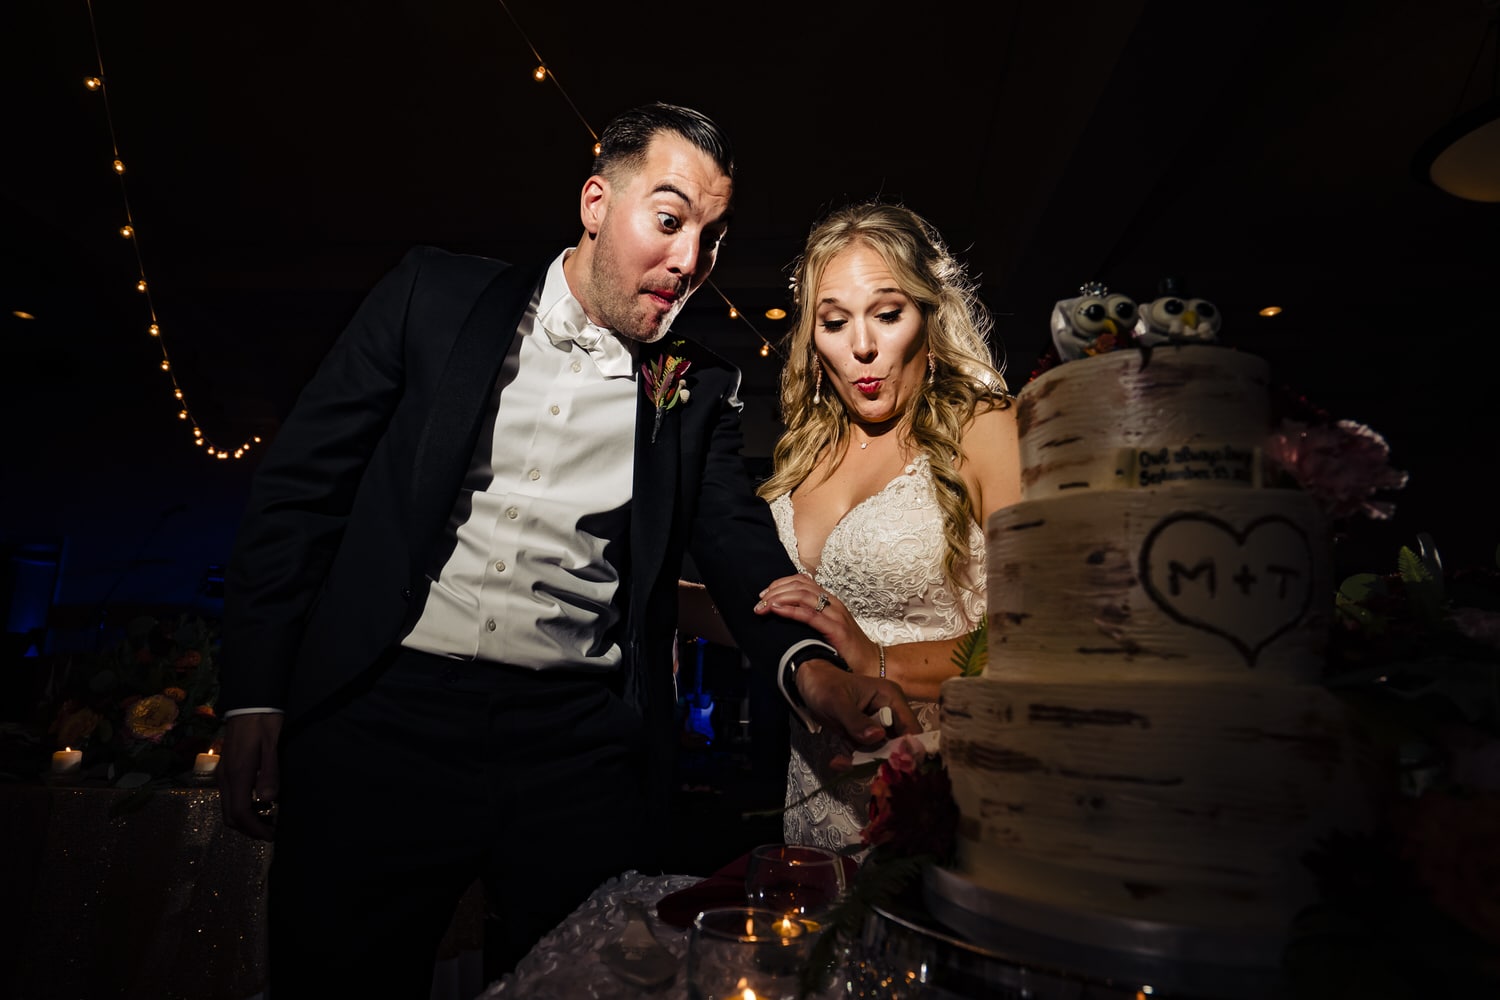 A colorful, candid picture of a bride and groom laughing together as they cut a wedding cake. 